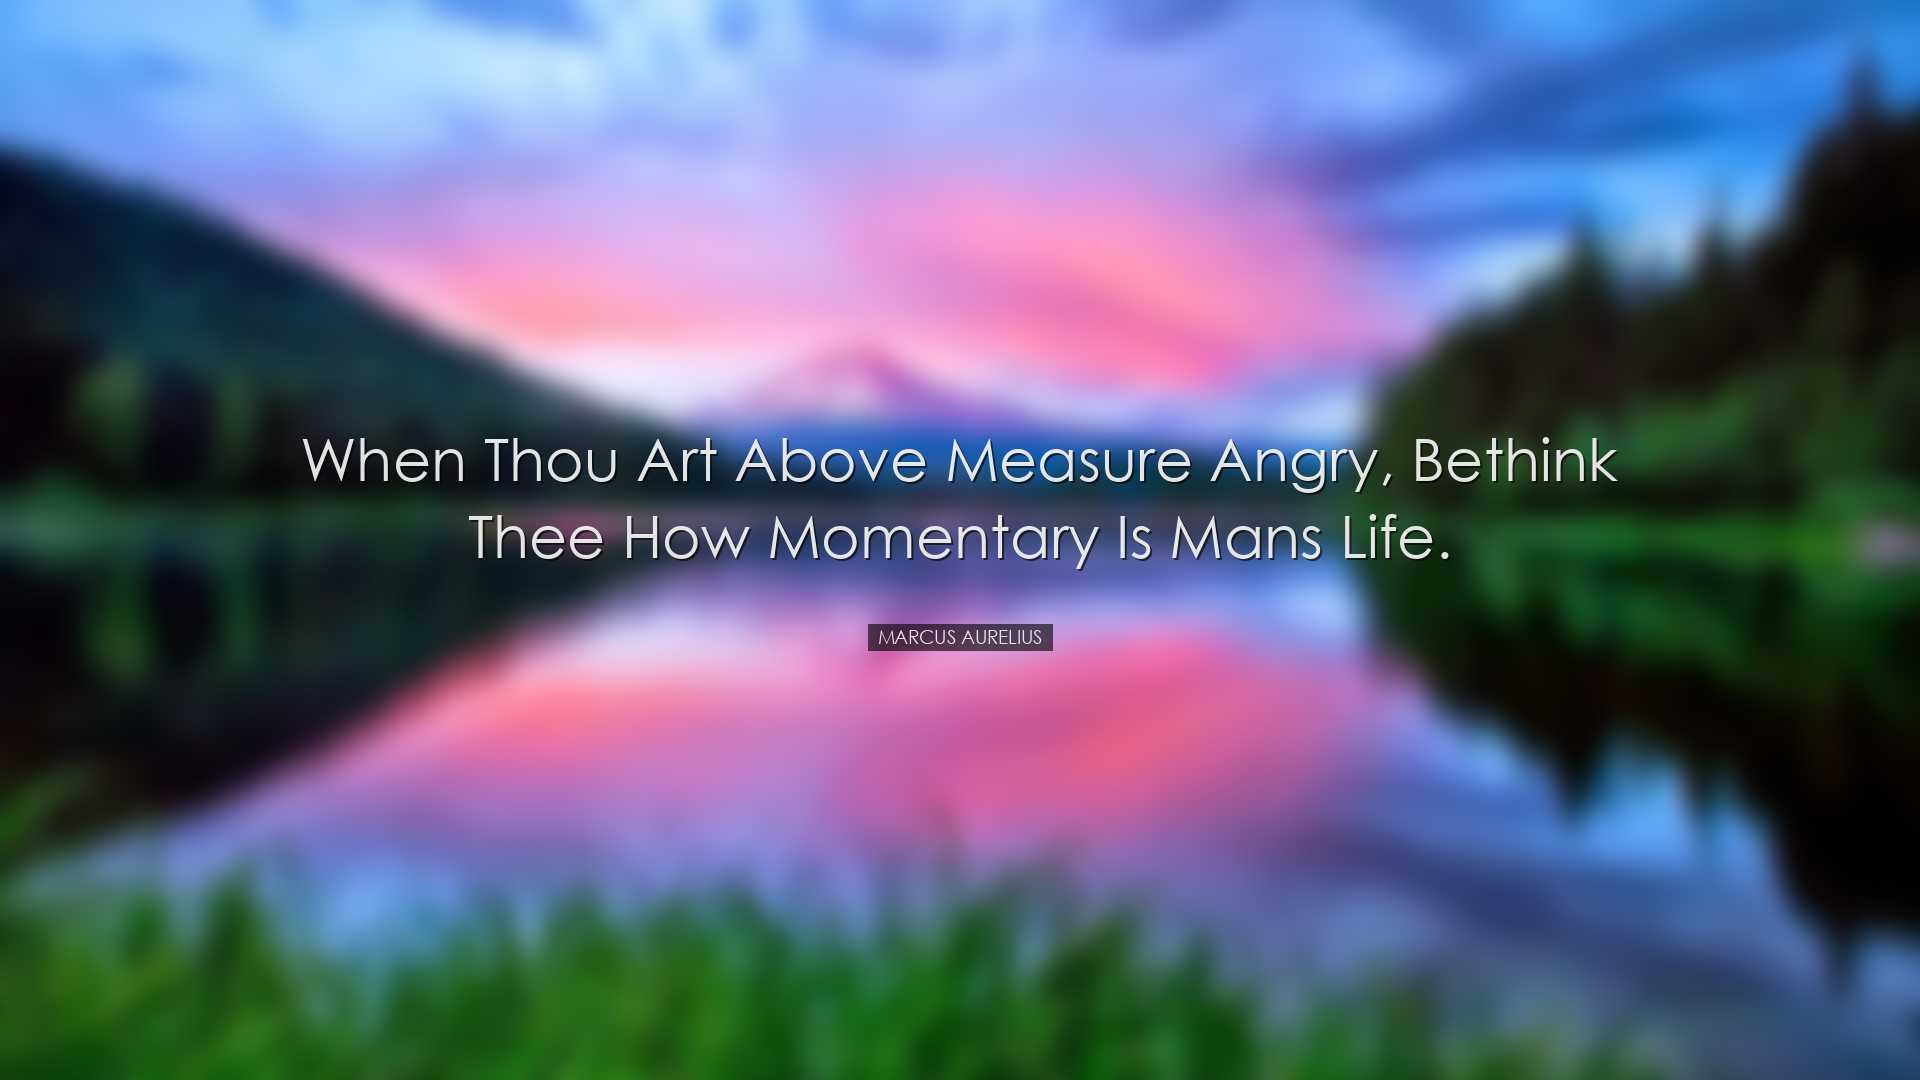 When thou art above measure angry, bethink thee how momentary is m